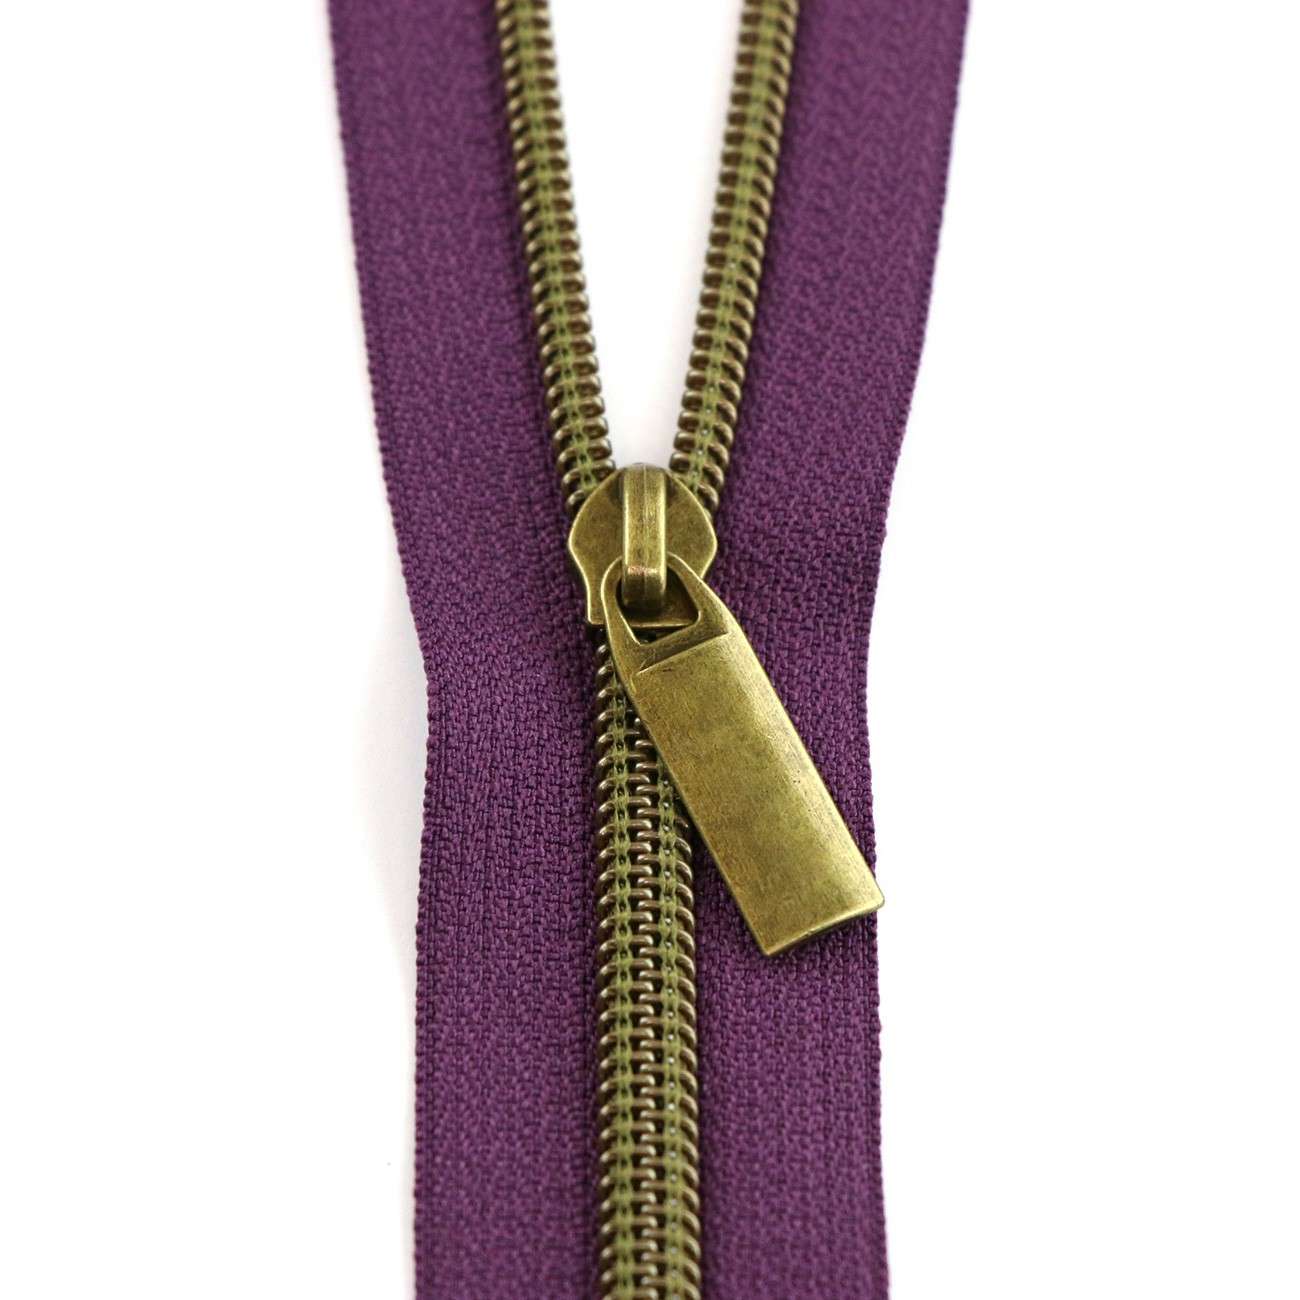 108 Zipper Purple #5 Nylon Antique Coil Zippers: 3 Yards with 9 Pulls